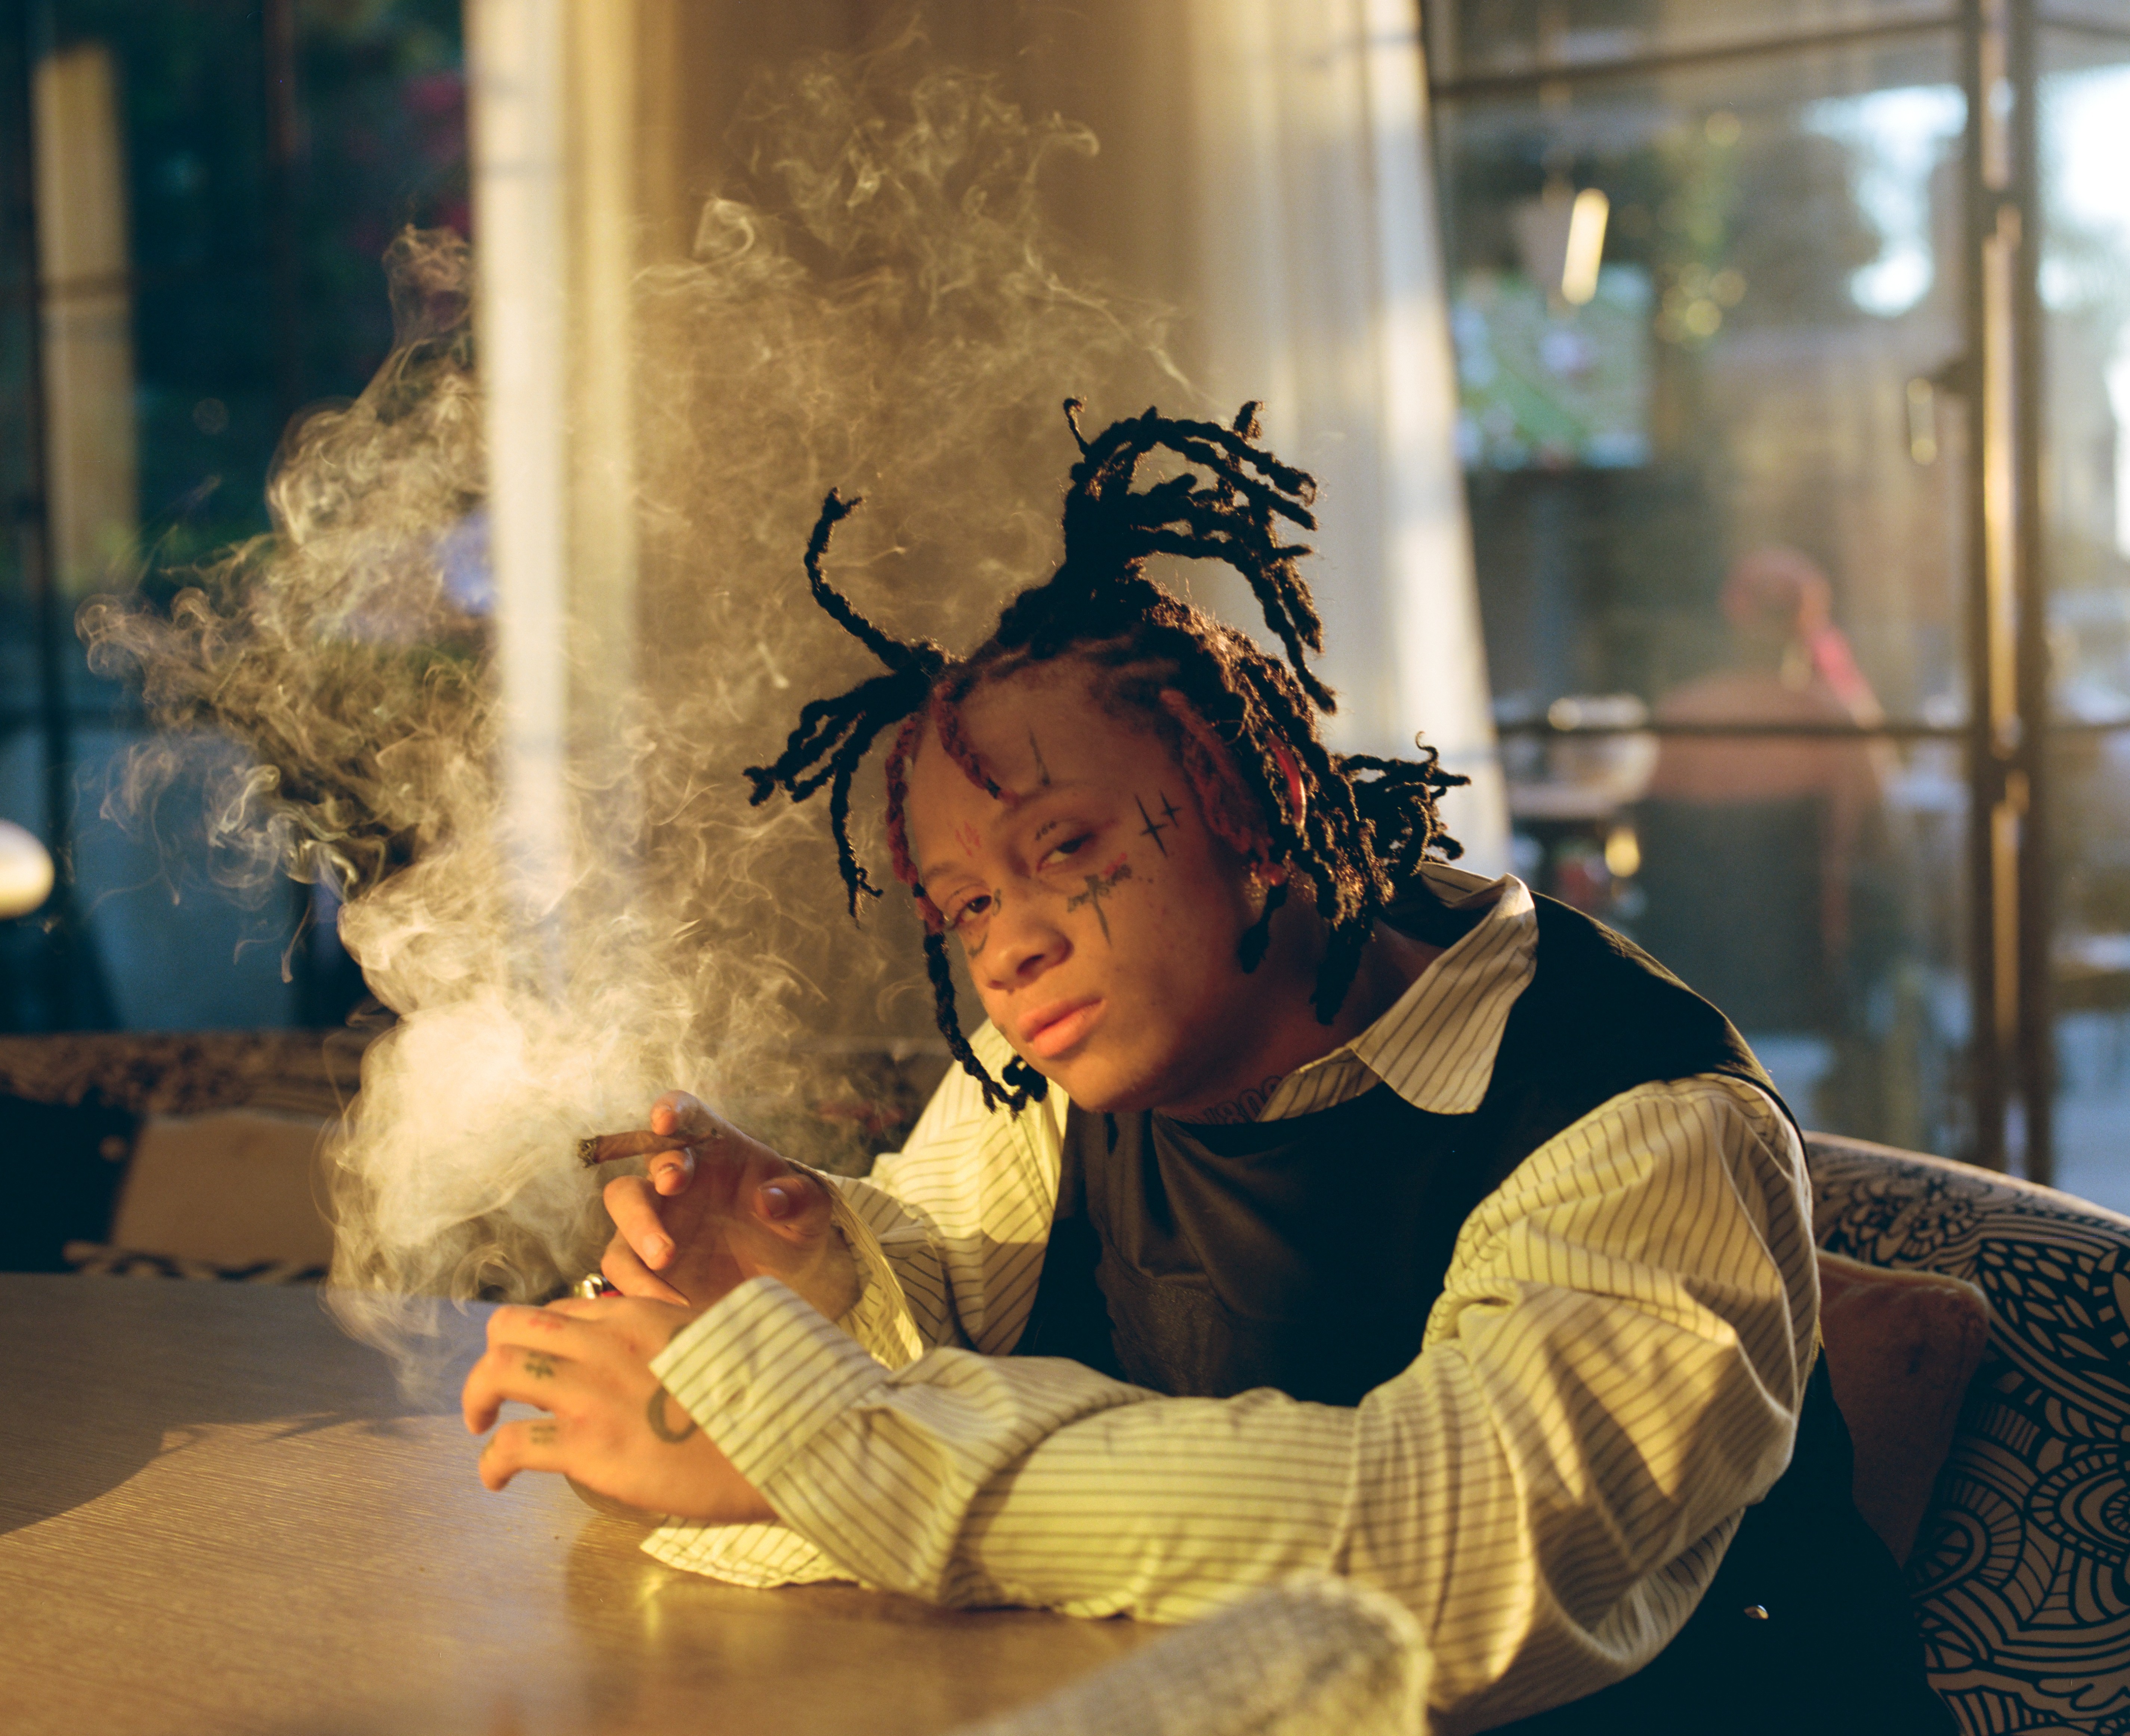 sokker stavelse hvordan Things to Do in Miami: Trippie Redd at the Fillmore Miami Beach February  29, 2020 | Miami New Times